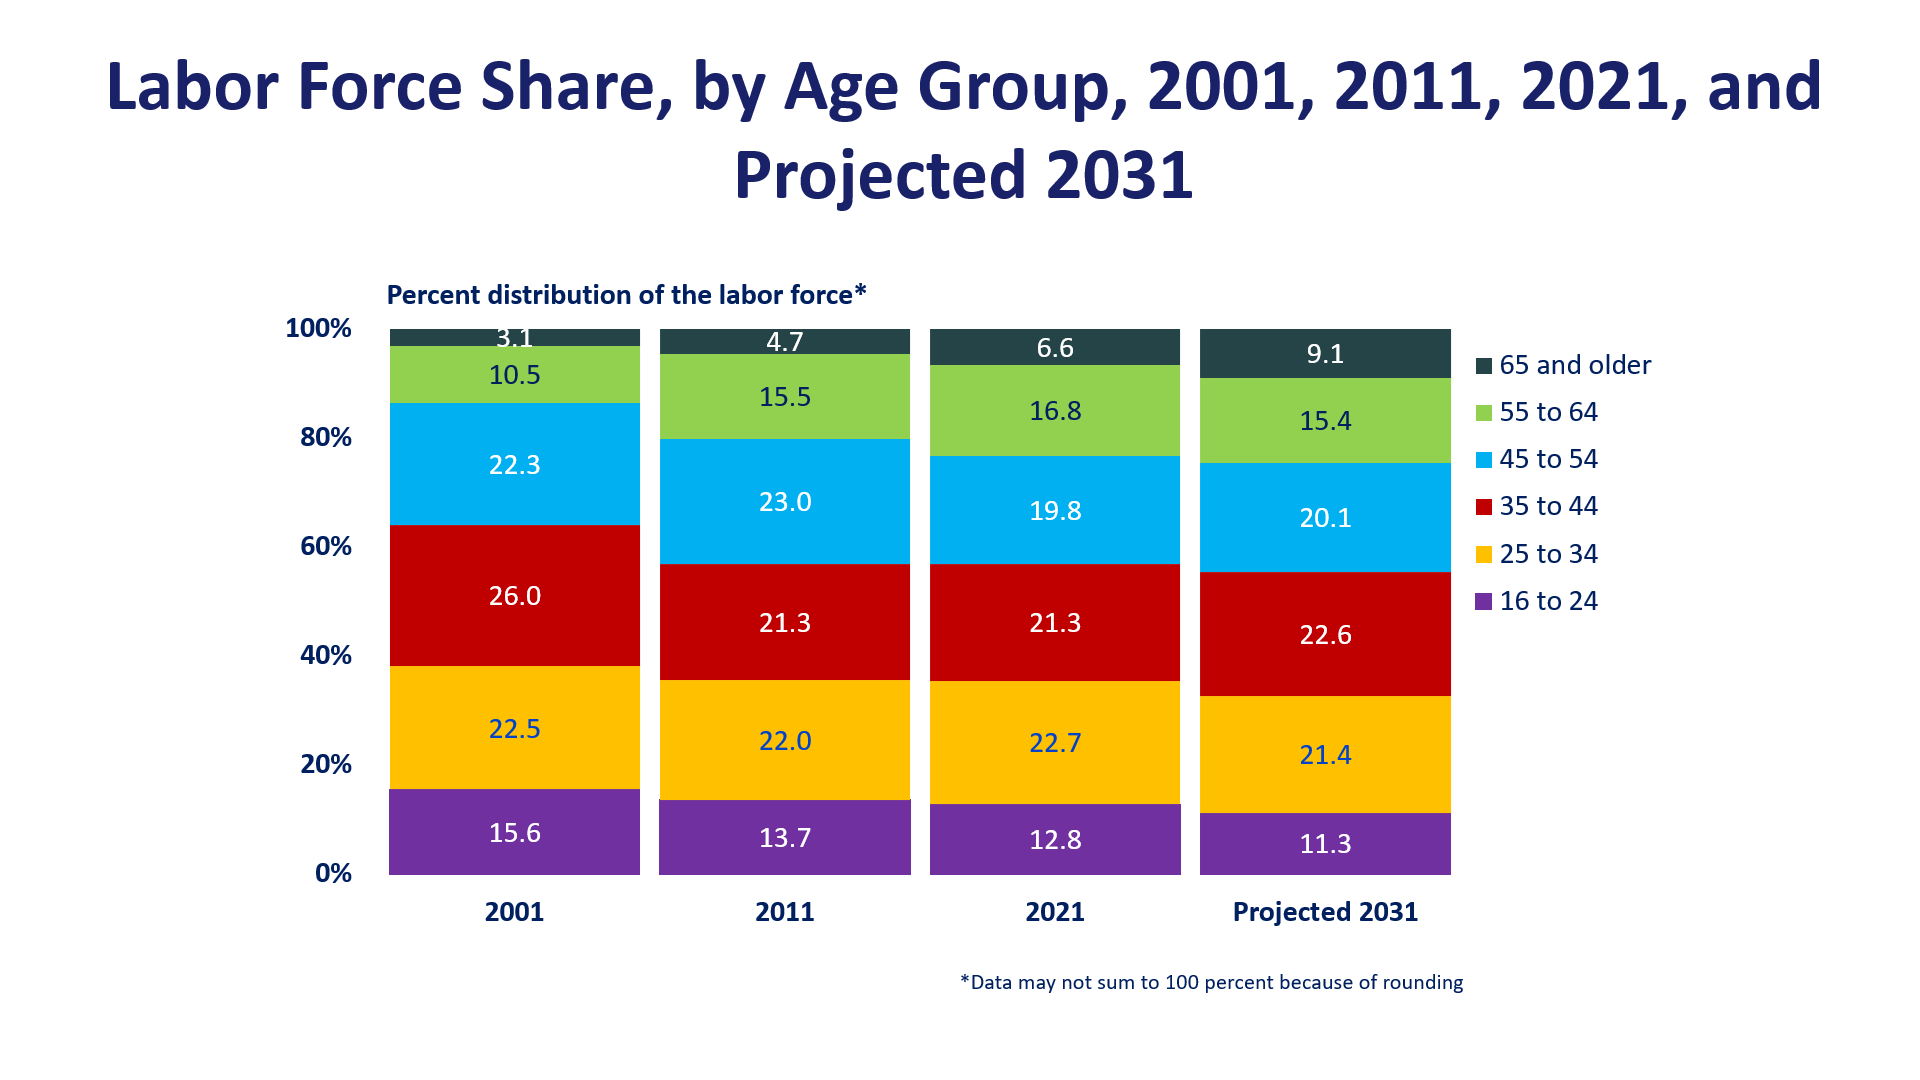 Labor force share, by age group, 2001, 2011, 2021, and projected 2031